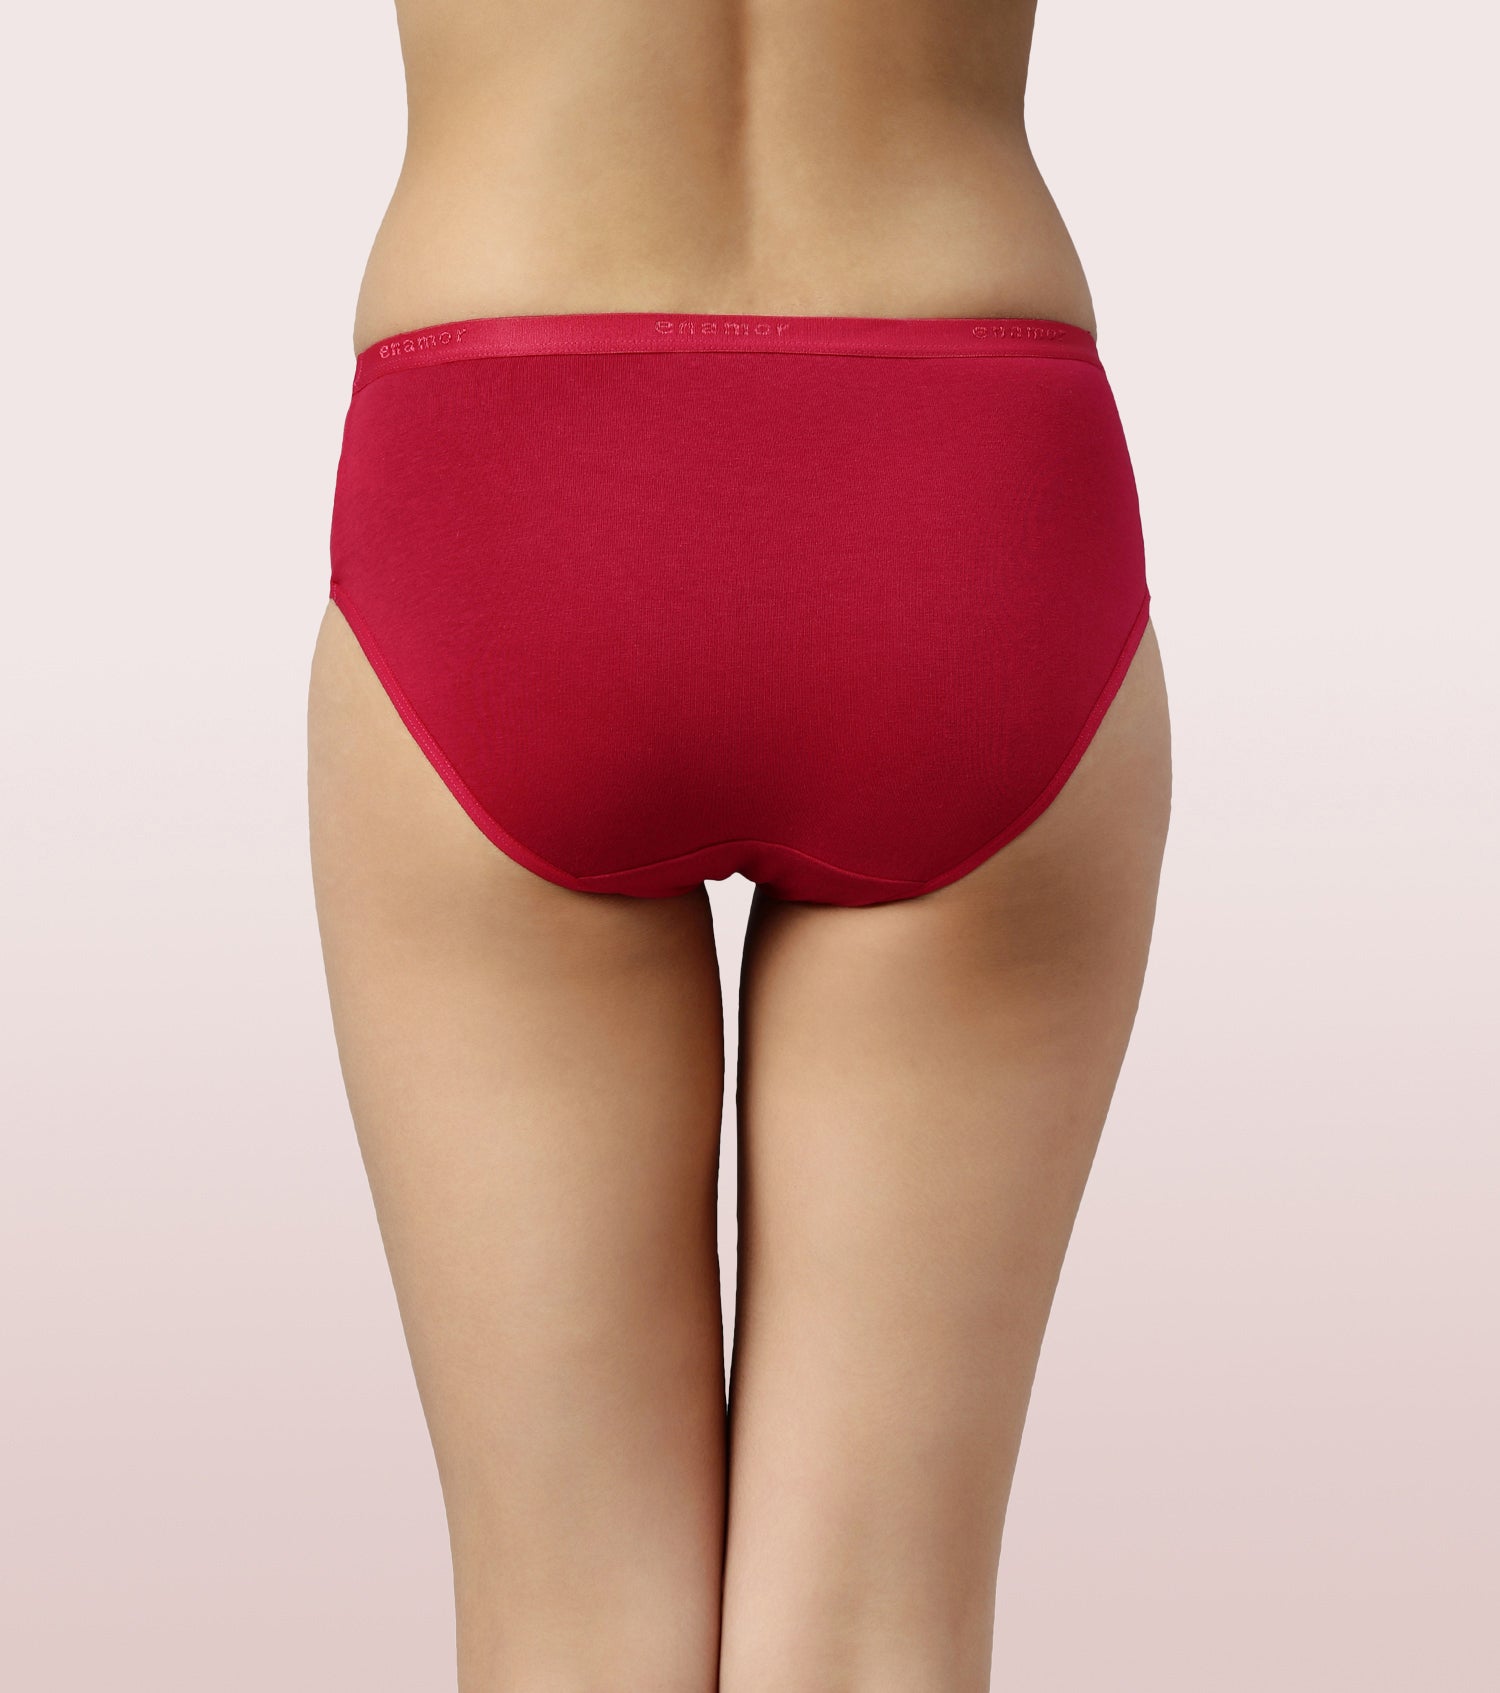 Hipster Panty  Full Coverage & Mid Waist -Assorted-Pack Of 5-Colors A –  Enamor